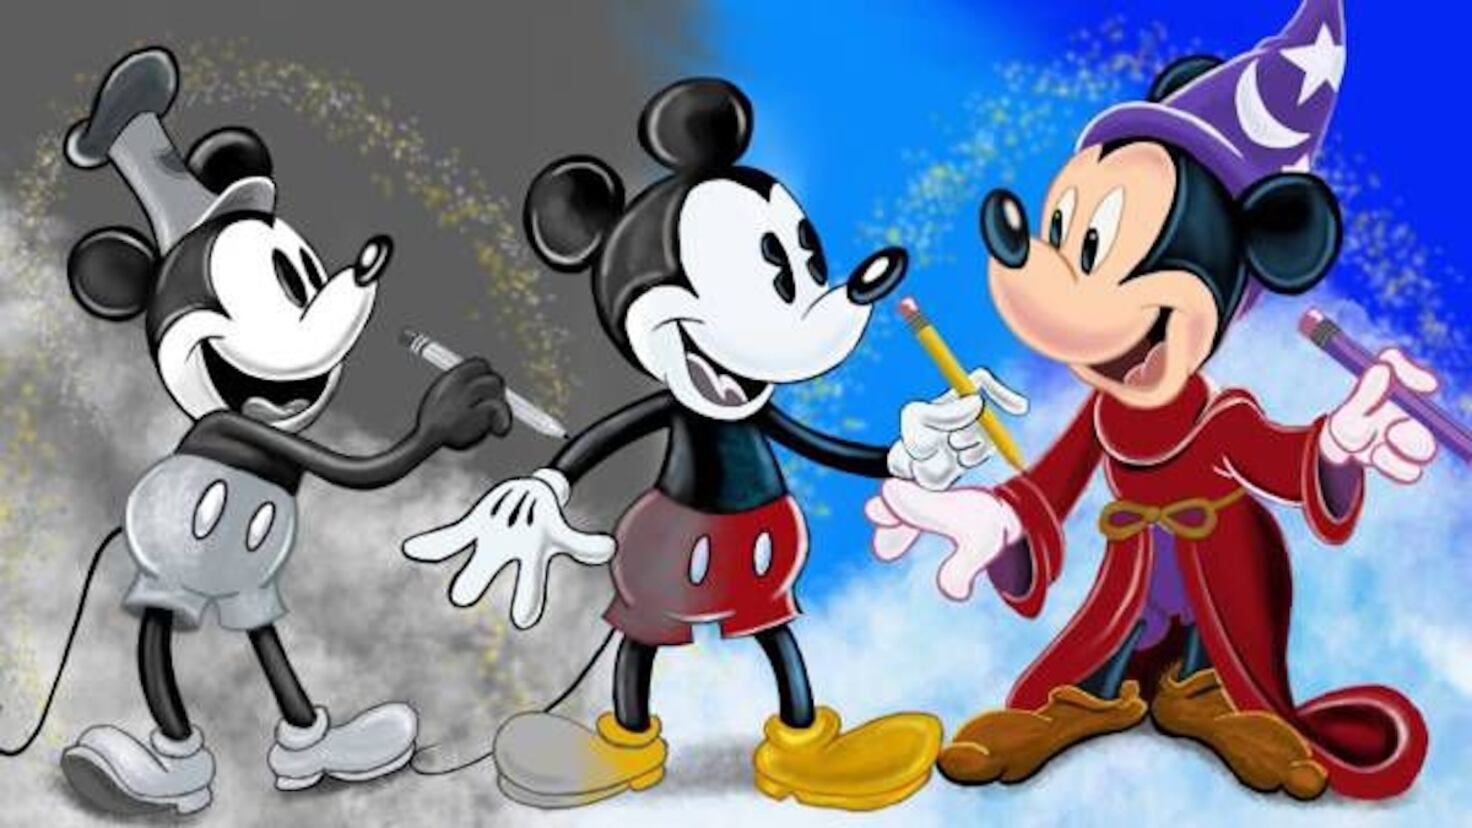 Disney's Mickey and Minnie Mouse Are Finally Entering the Public Domain